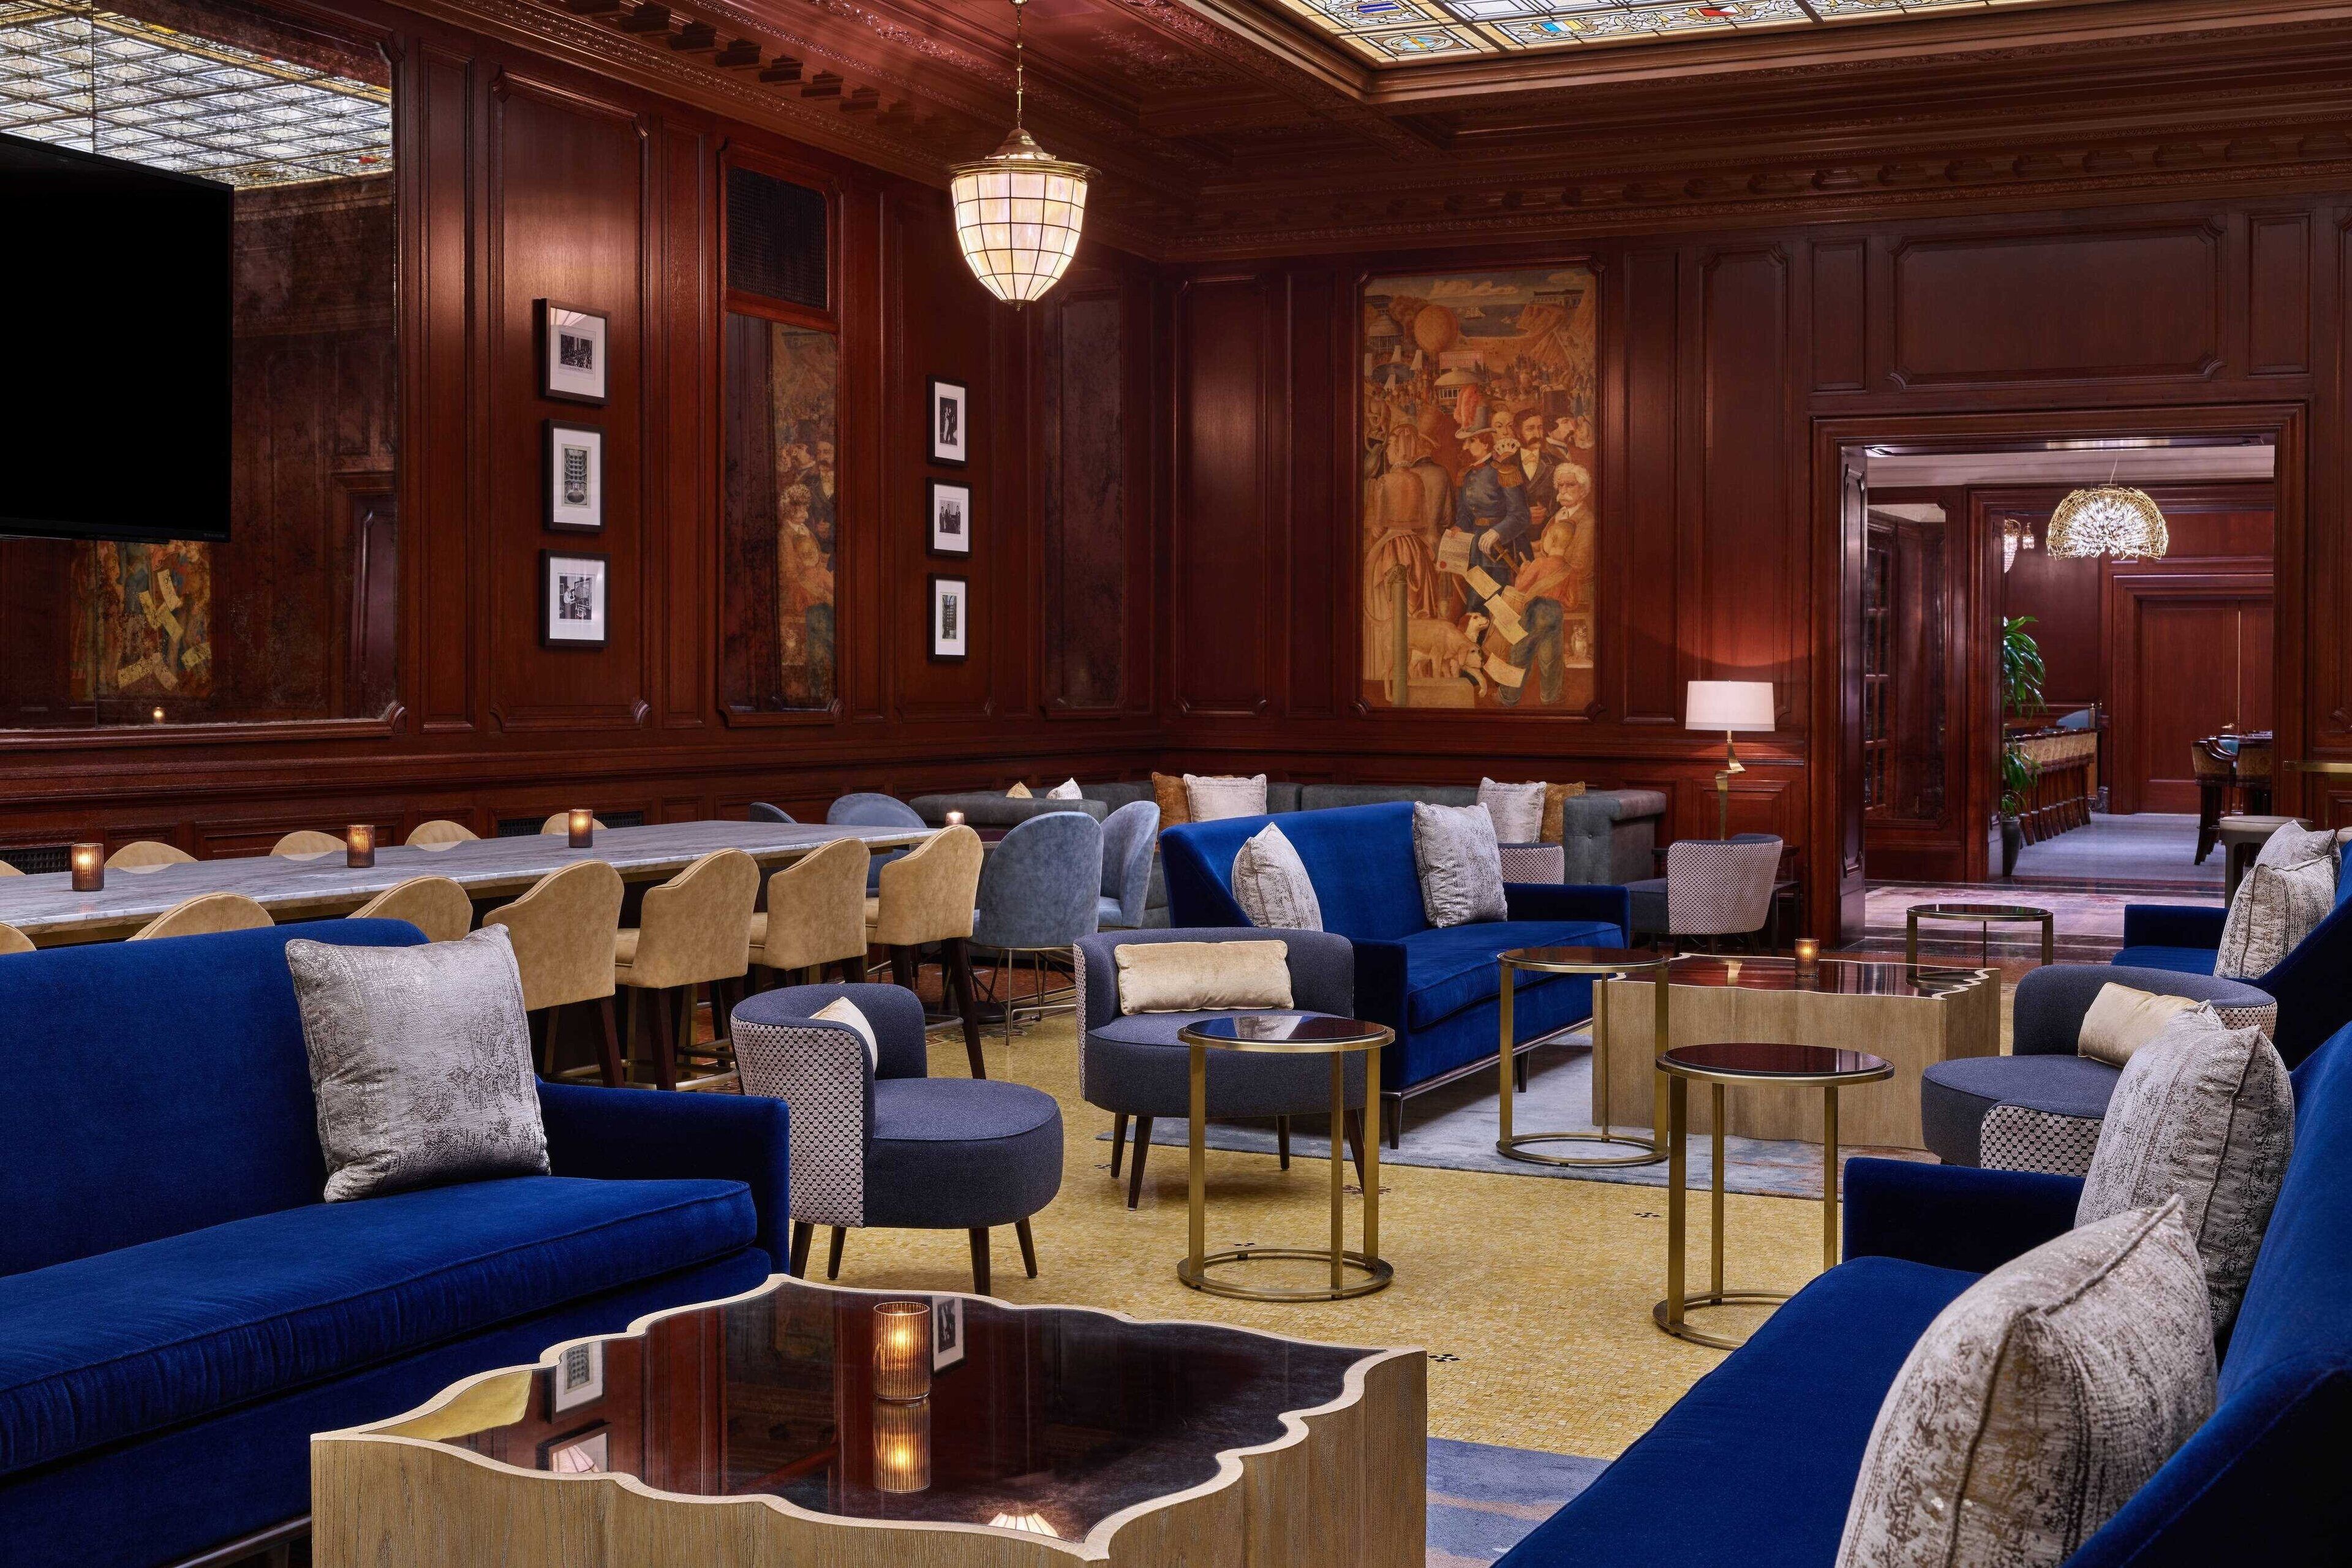 Palace Hotel, a Luxury Collection Hotel, San Francisco